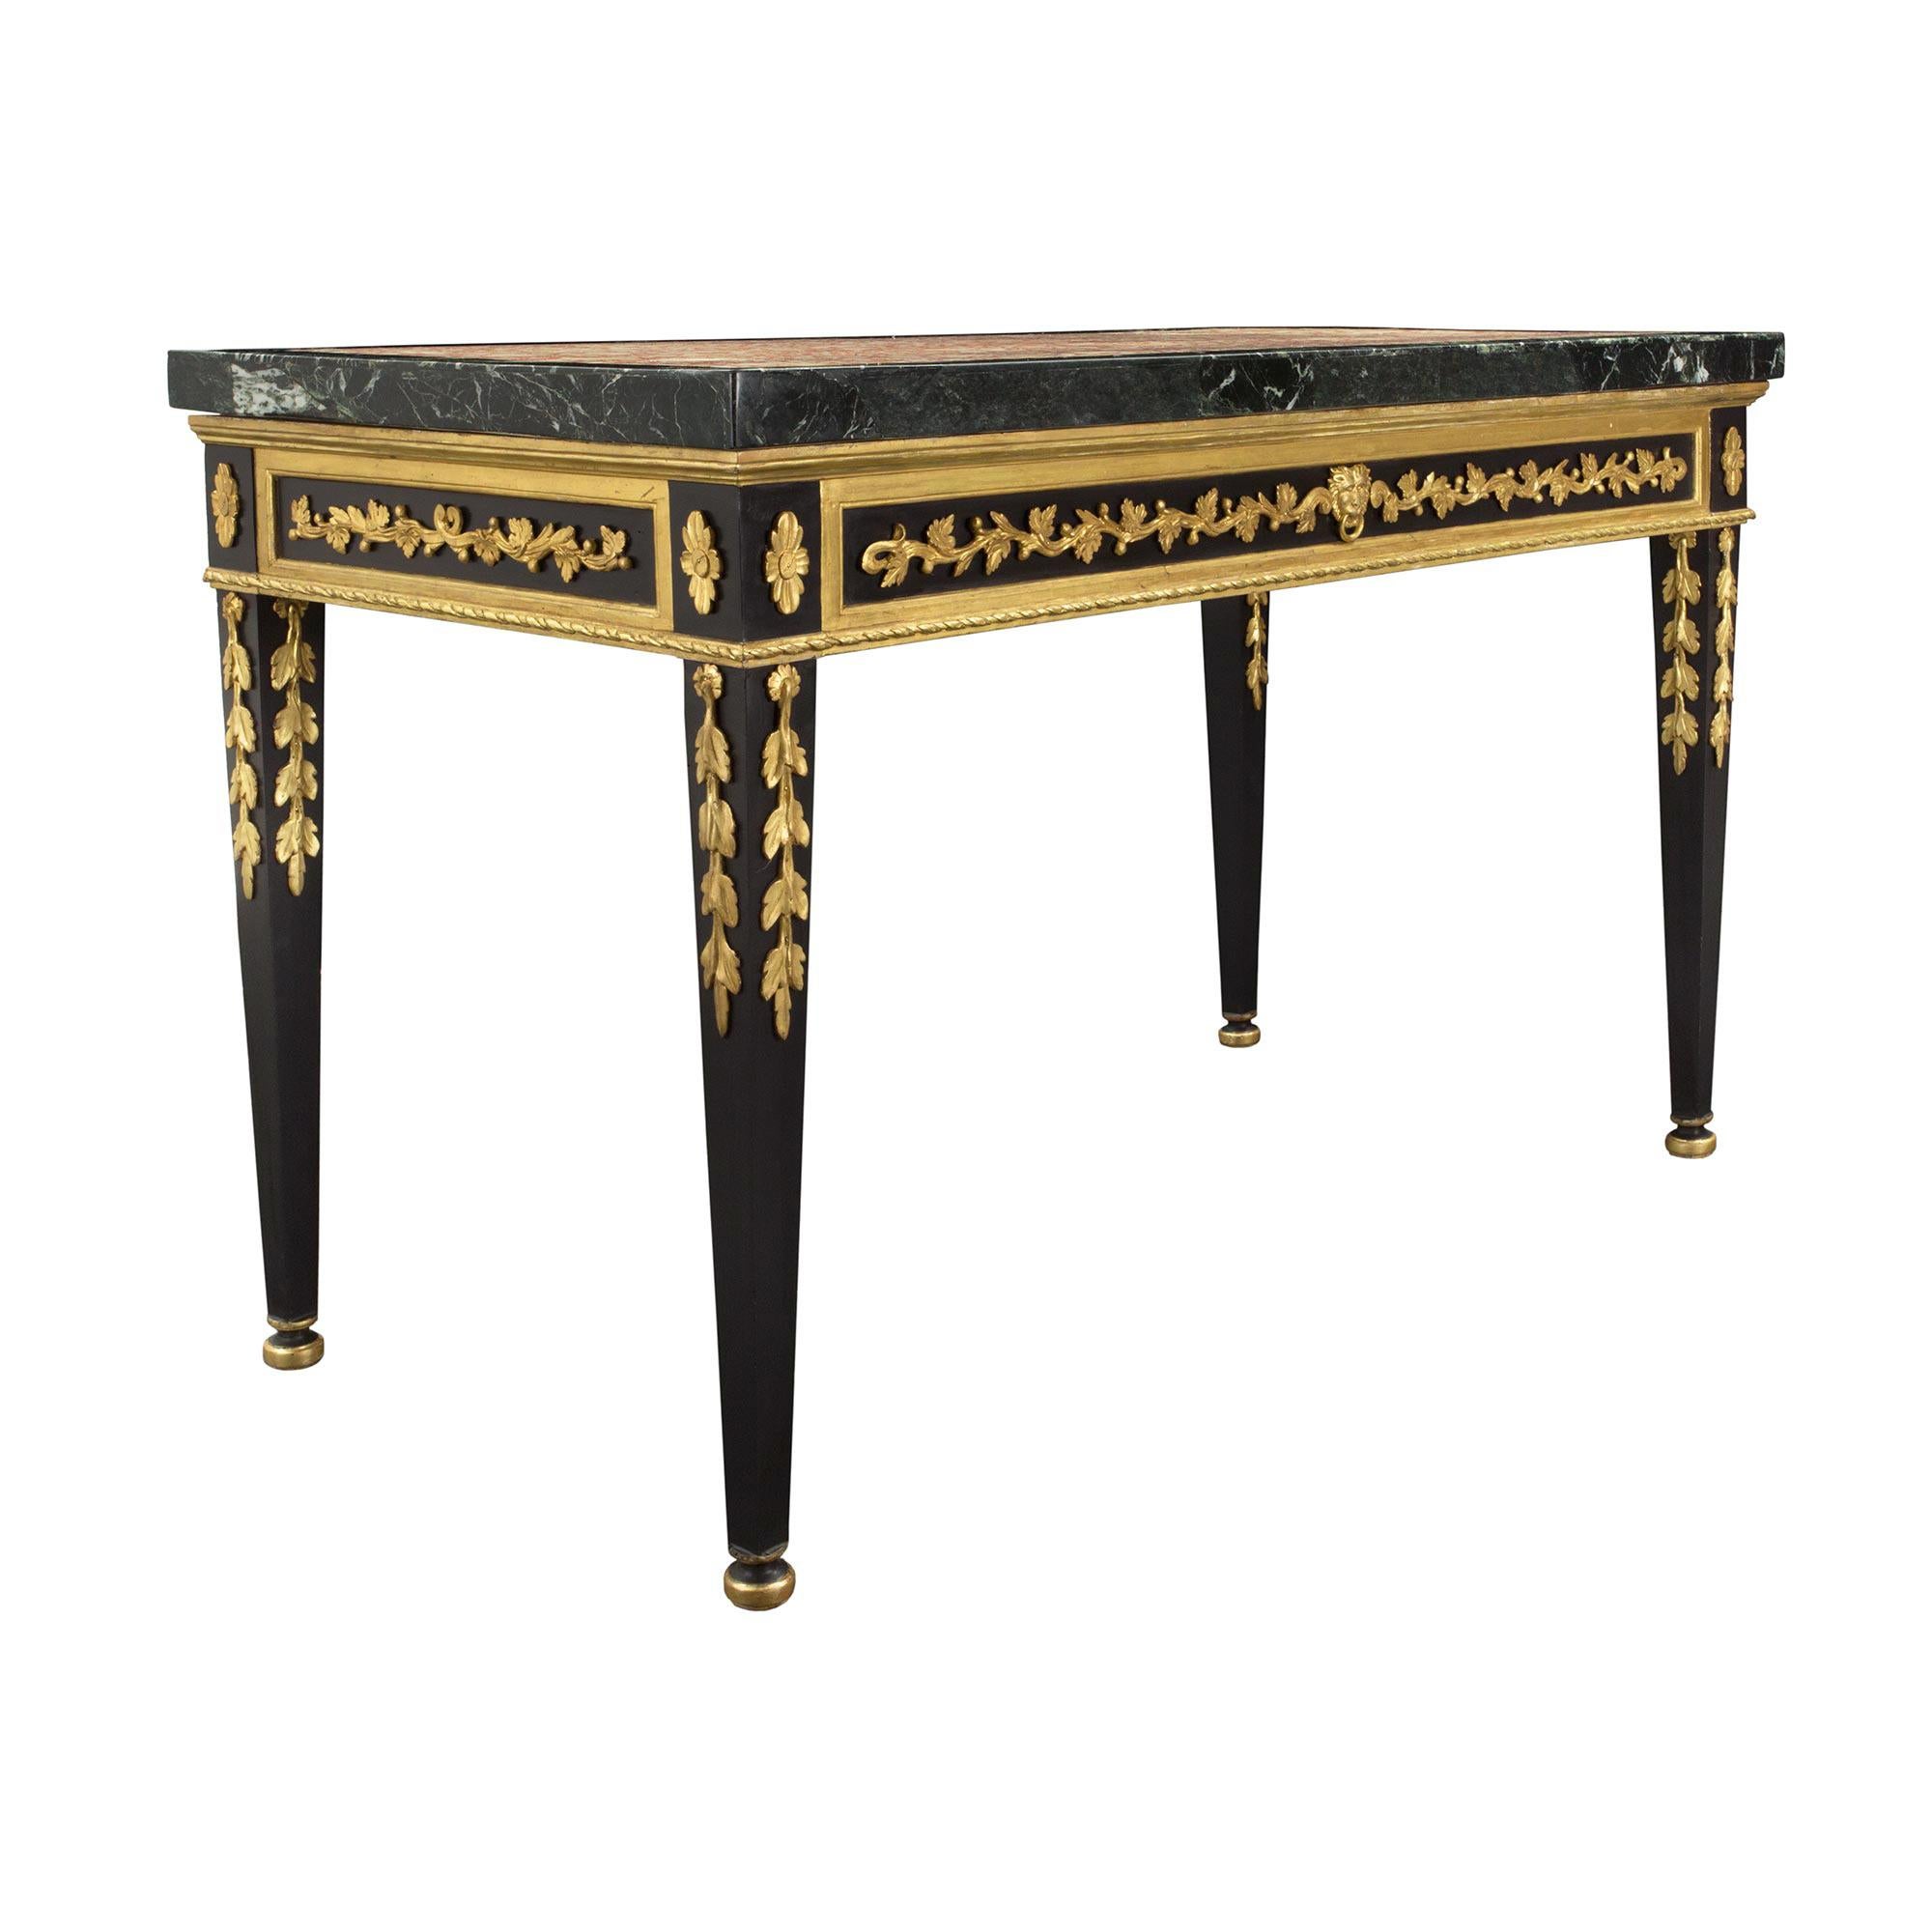 Italian 19th Century Louis XVI Giltwood and Marble Freestanding Console In Good Condition For Sale In West Palm Beach, FL